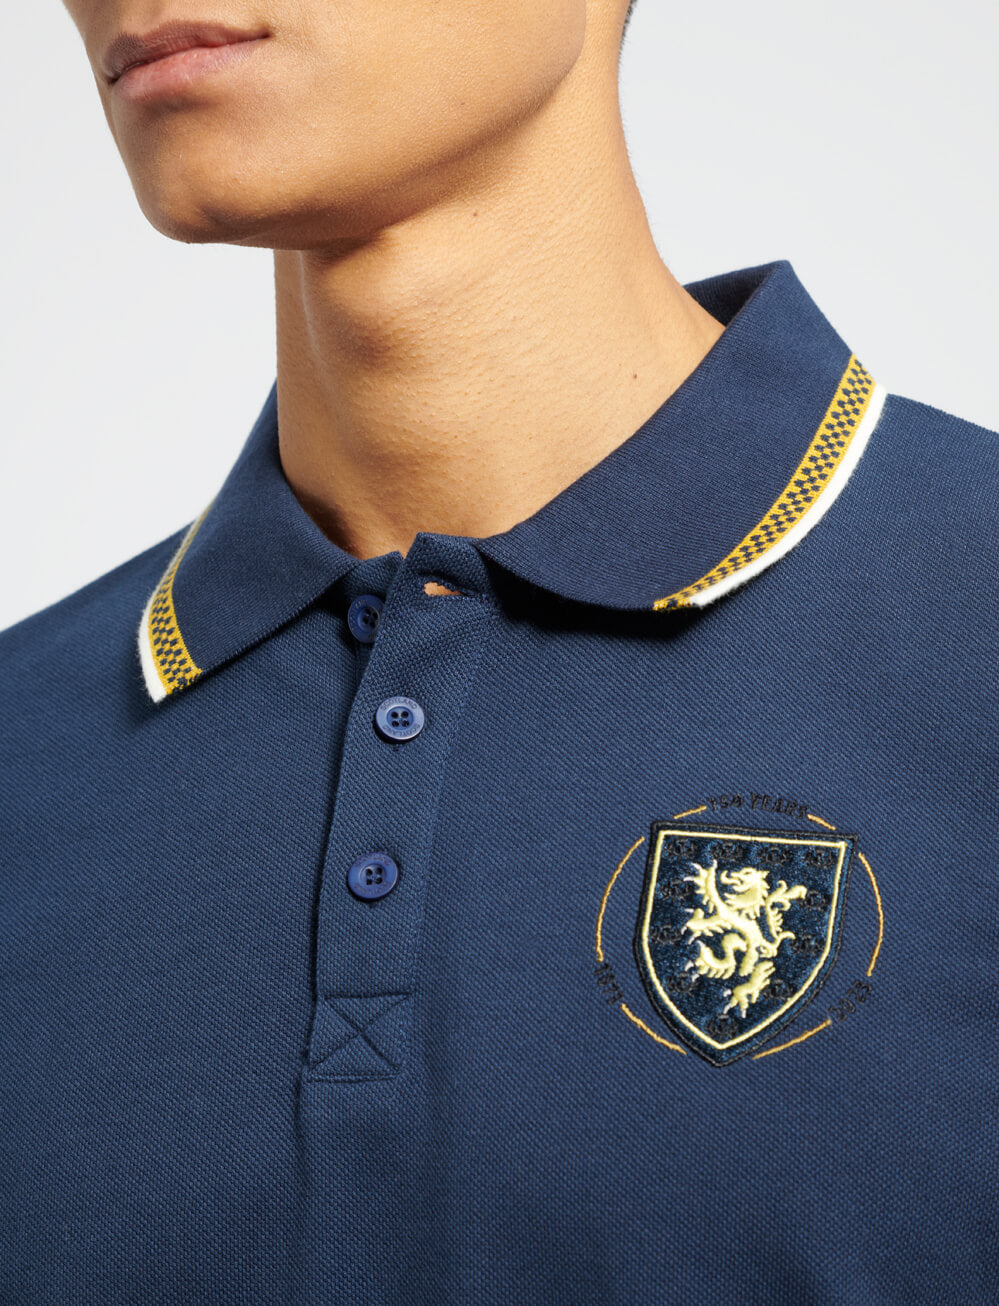 Official Team Scotland 150th Anniversary Tipped Polo Shirt - The World Football Store